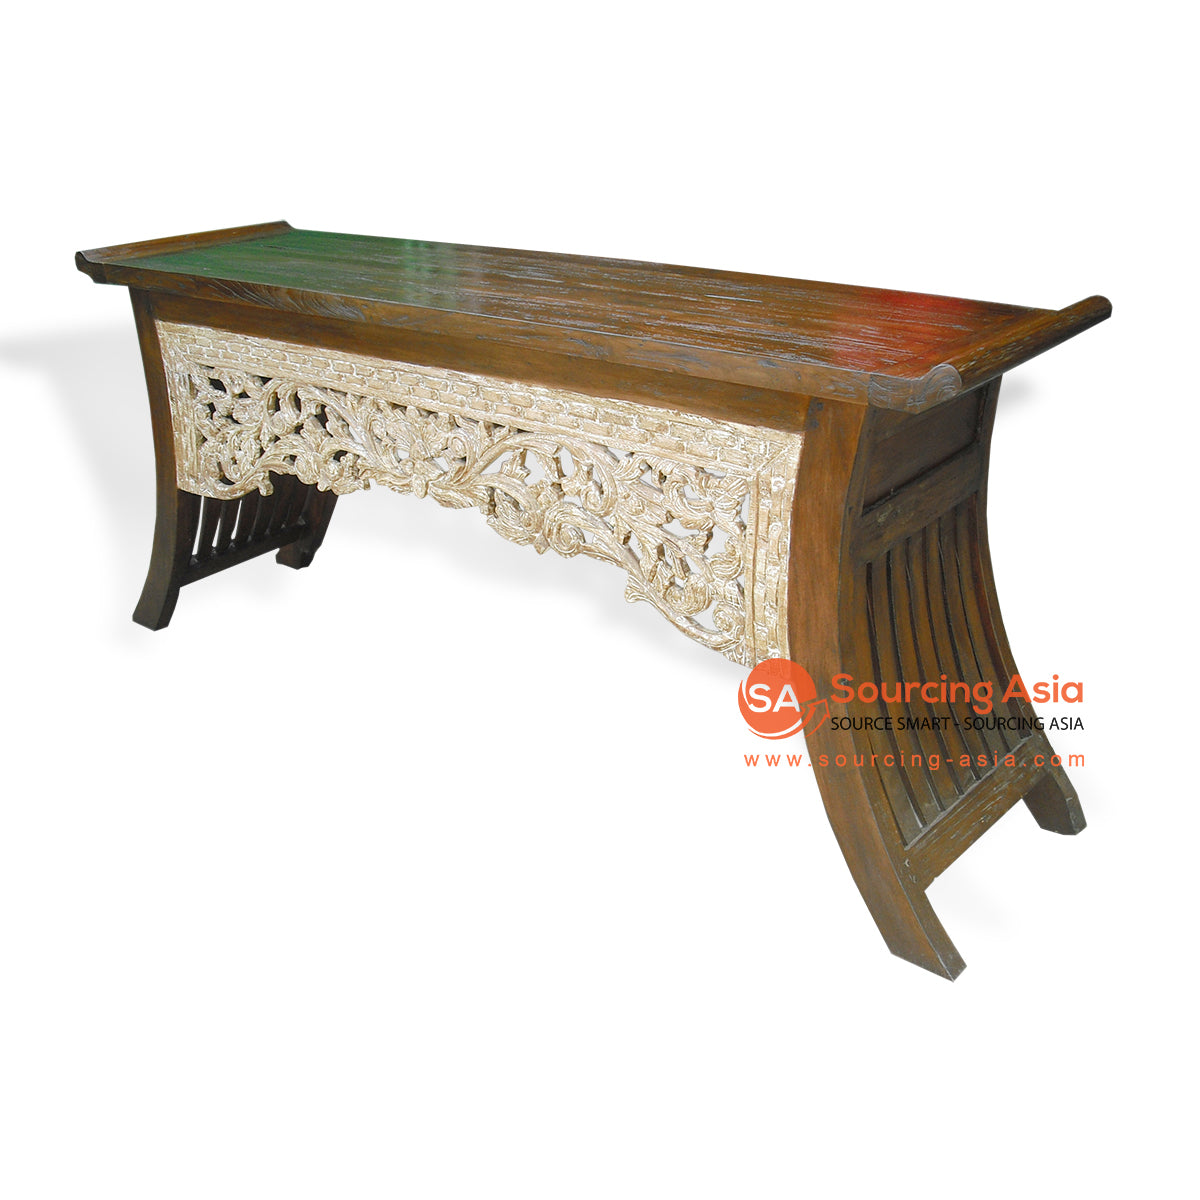 KYT10005-MB DARK BROWN AND WHITE TEAK WOOD CURVY ENDS CONSOLE TABLE WITH CARVING